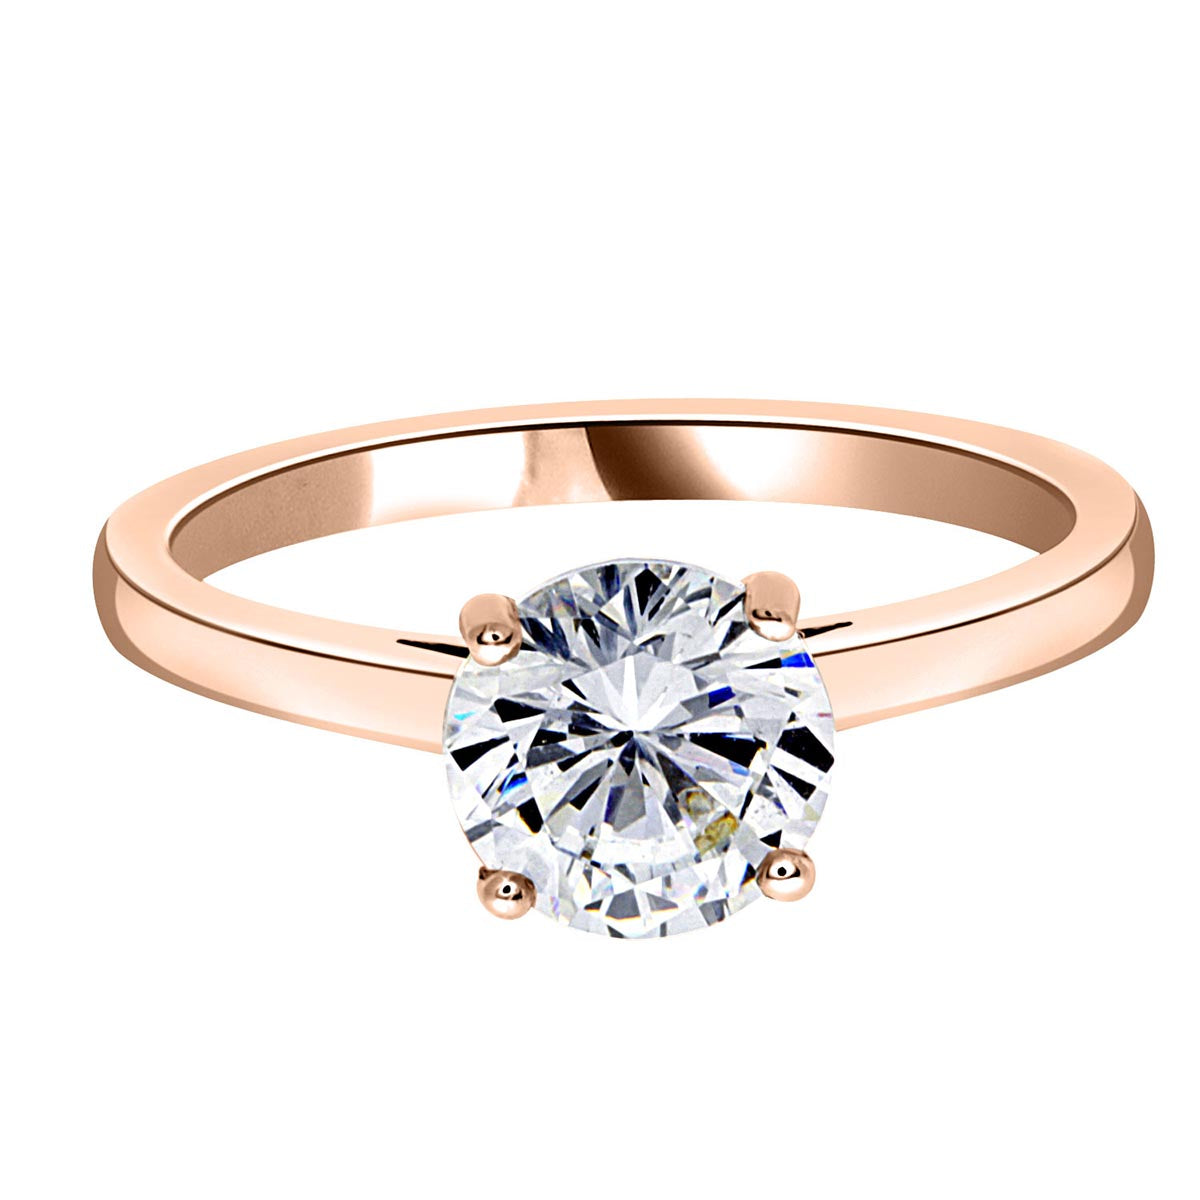 Solitaire Engagement Ring in rose gold